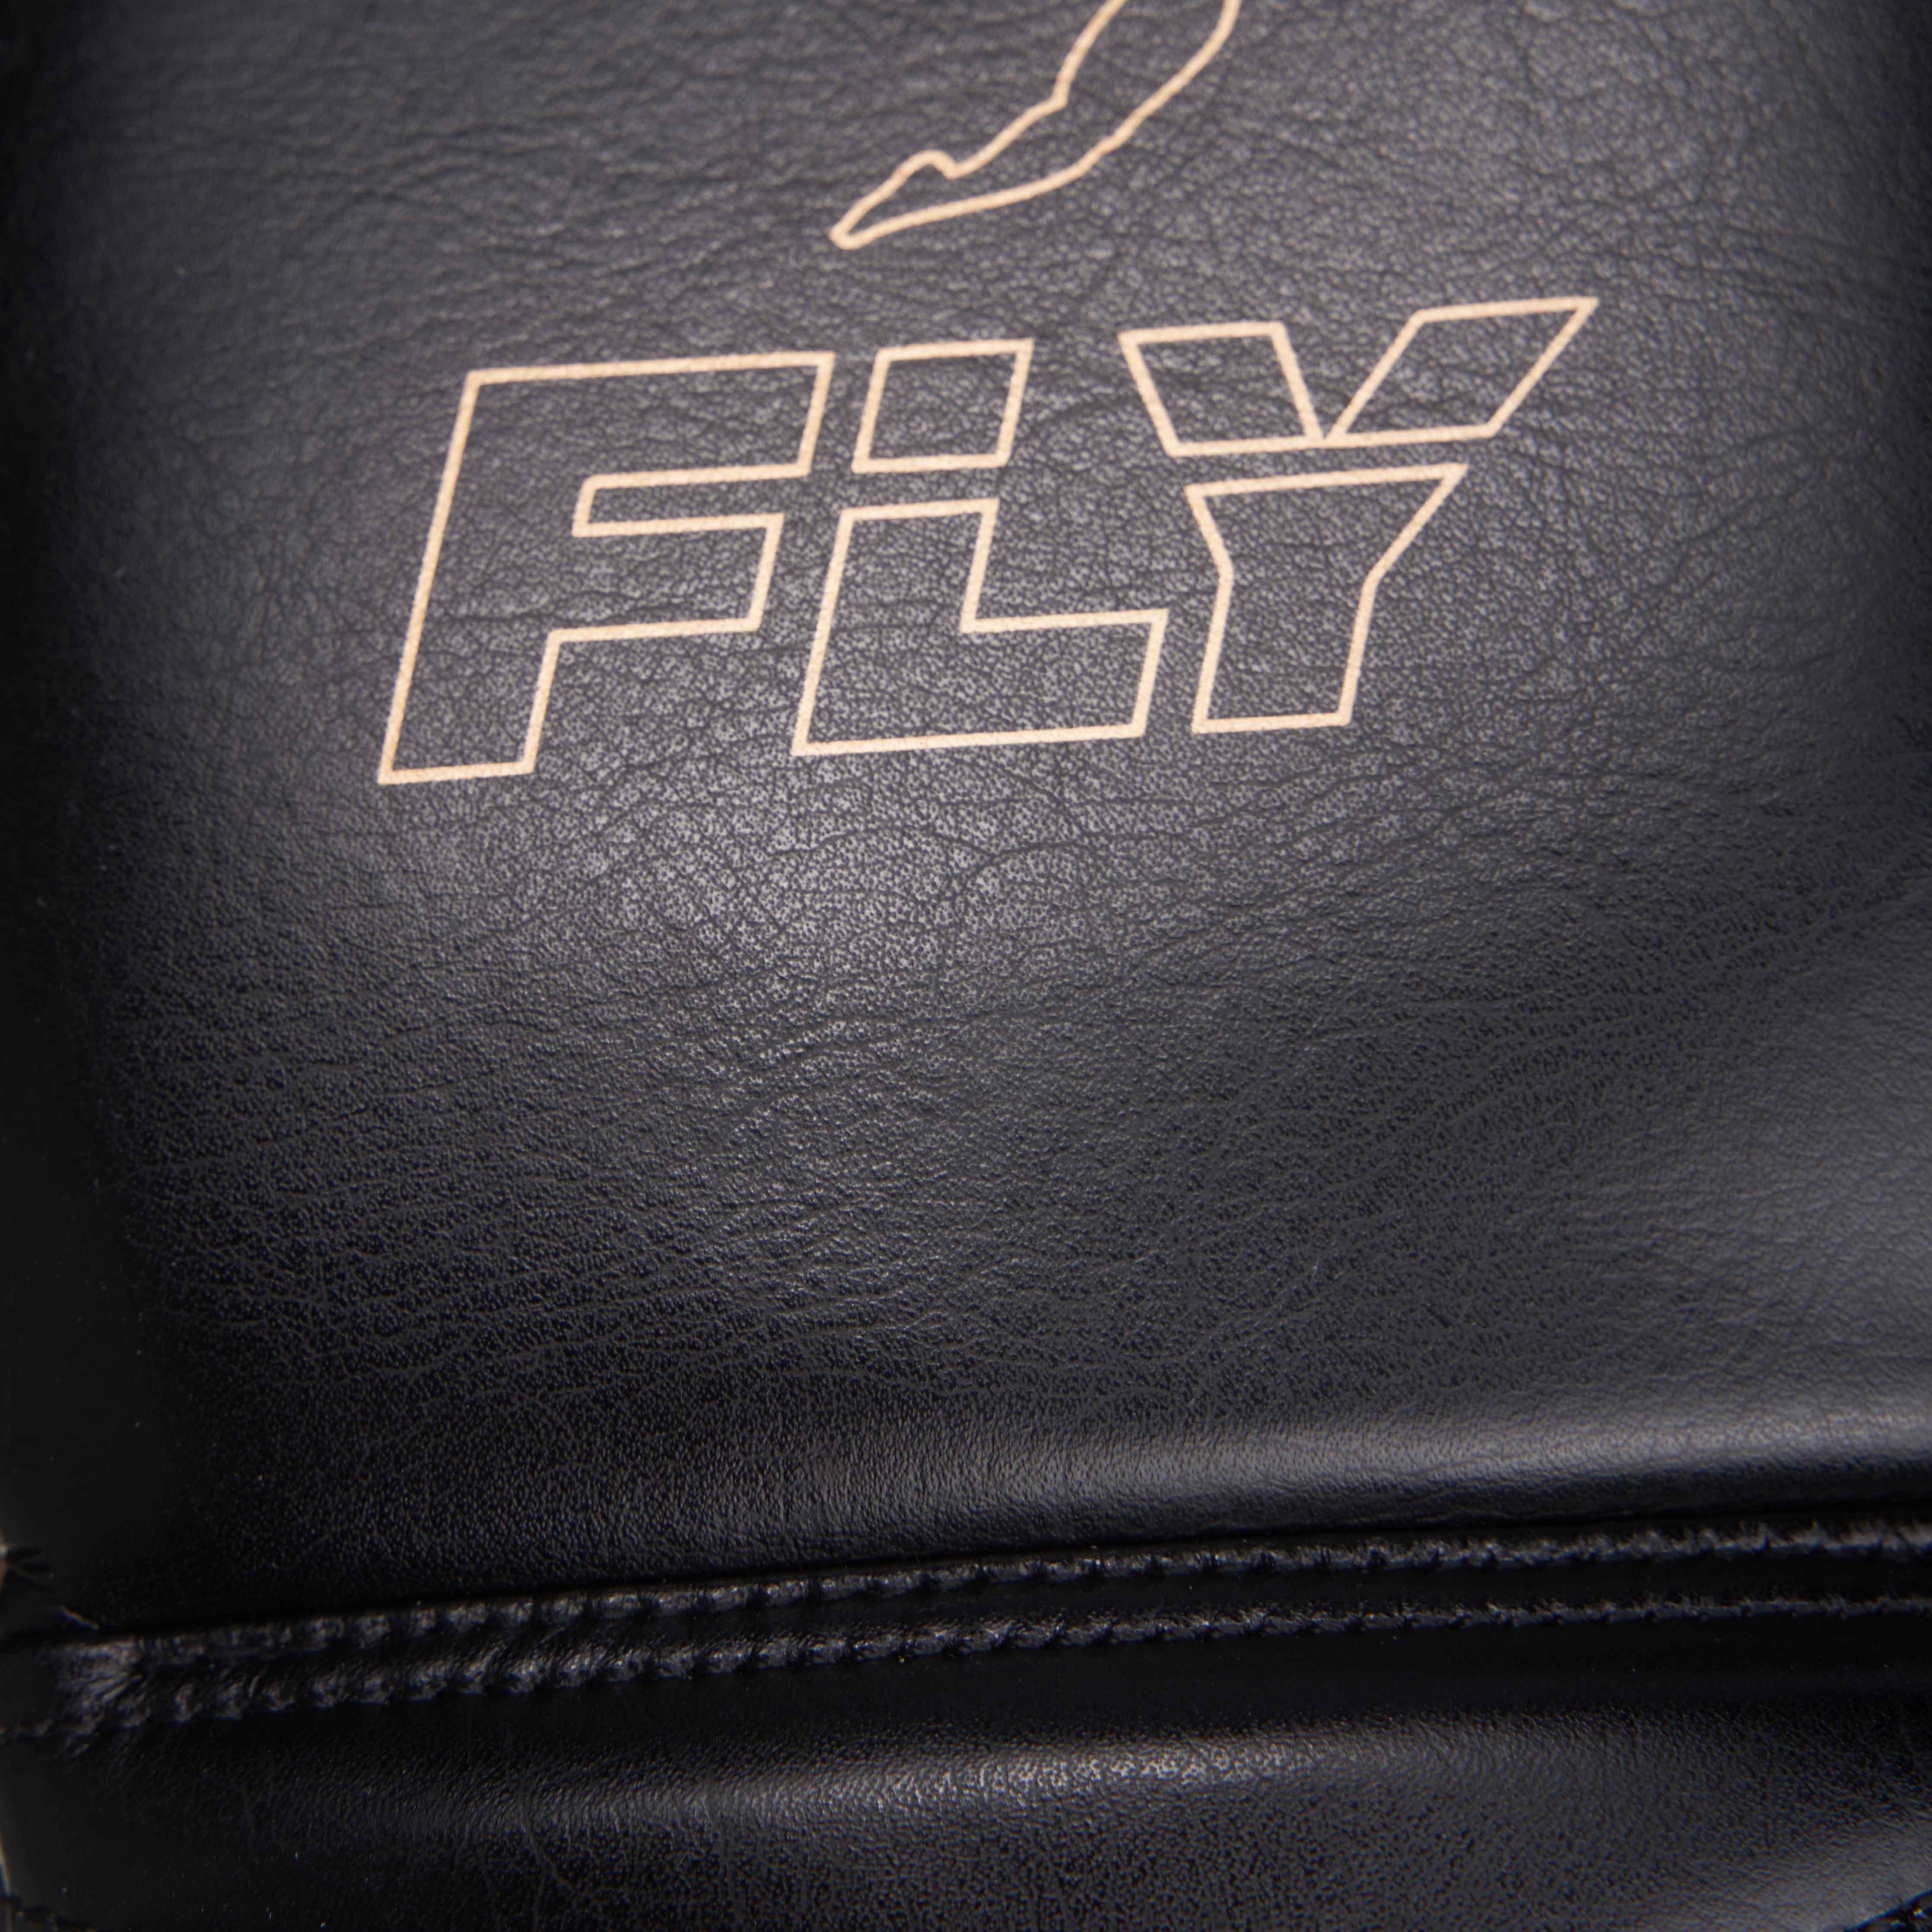 Fly Superlace X Black Gold Gloves - RINGMASTER SPORTS - Made For Champions